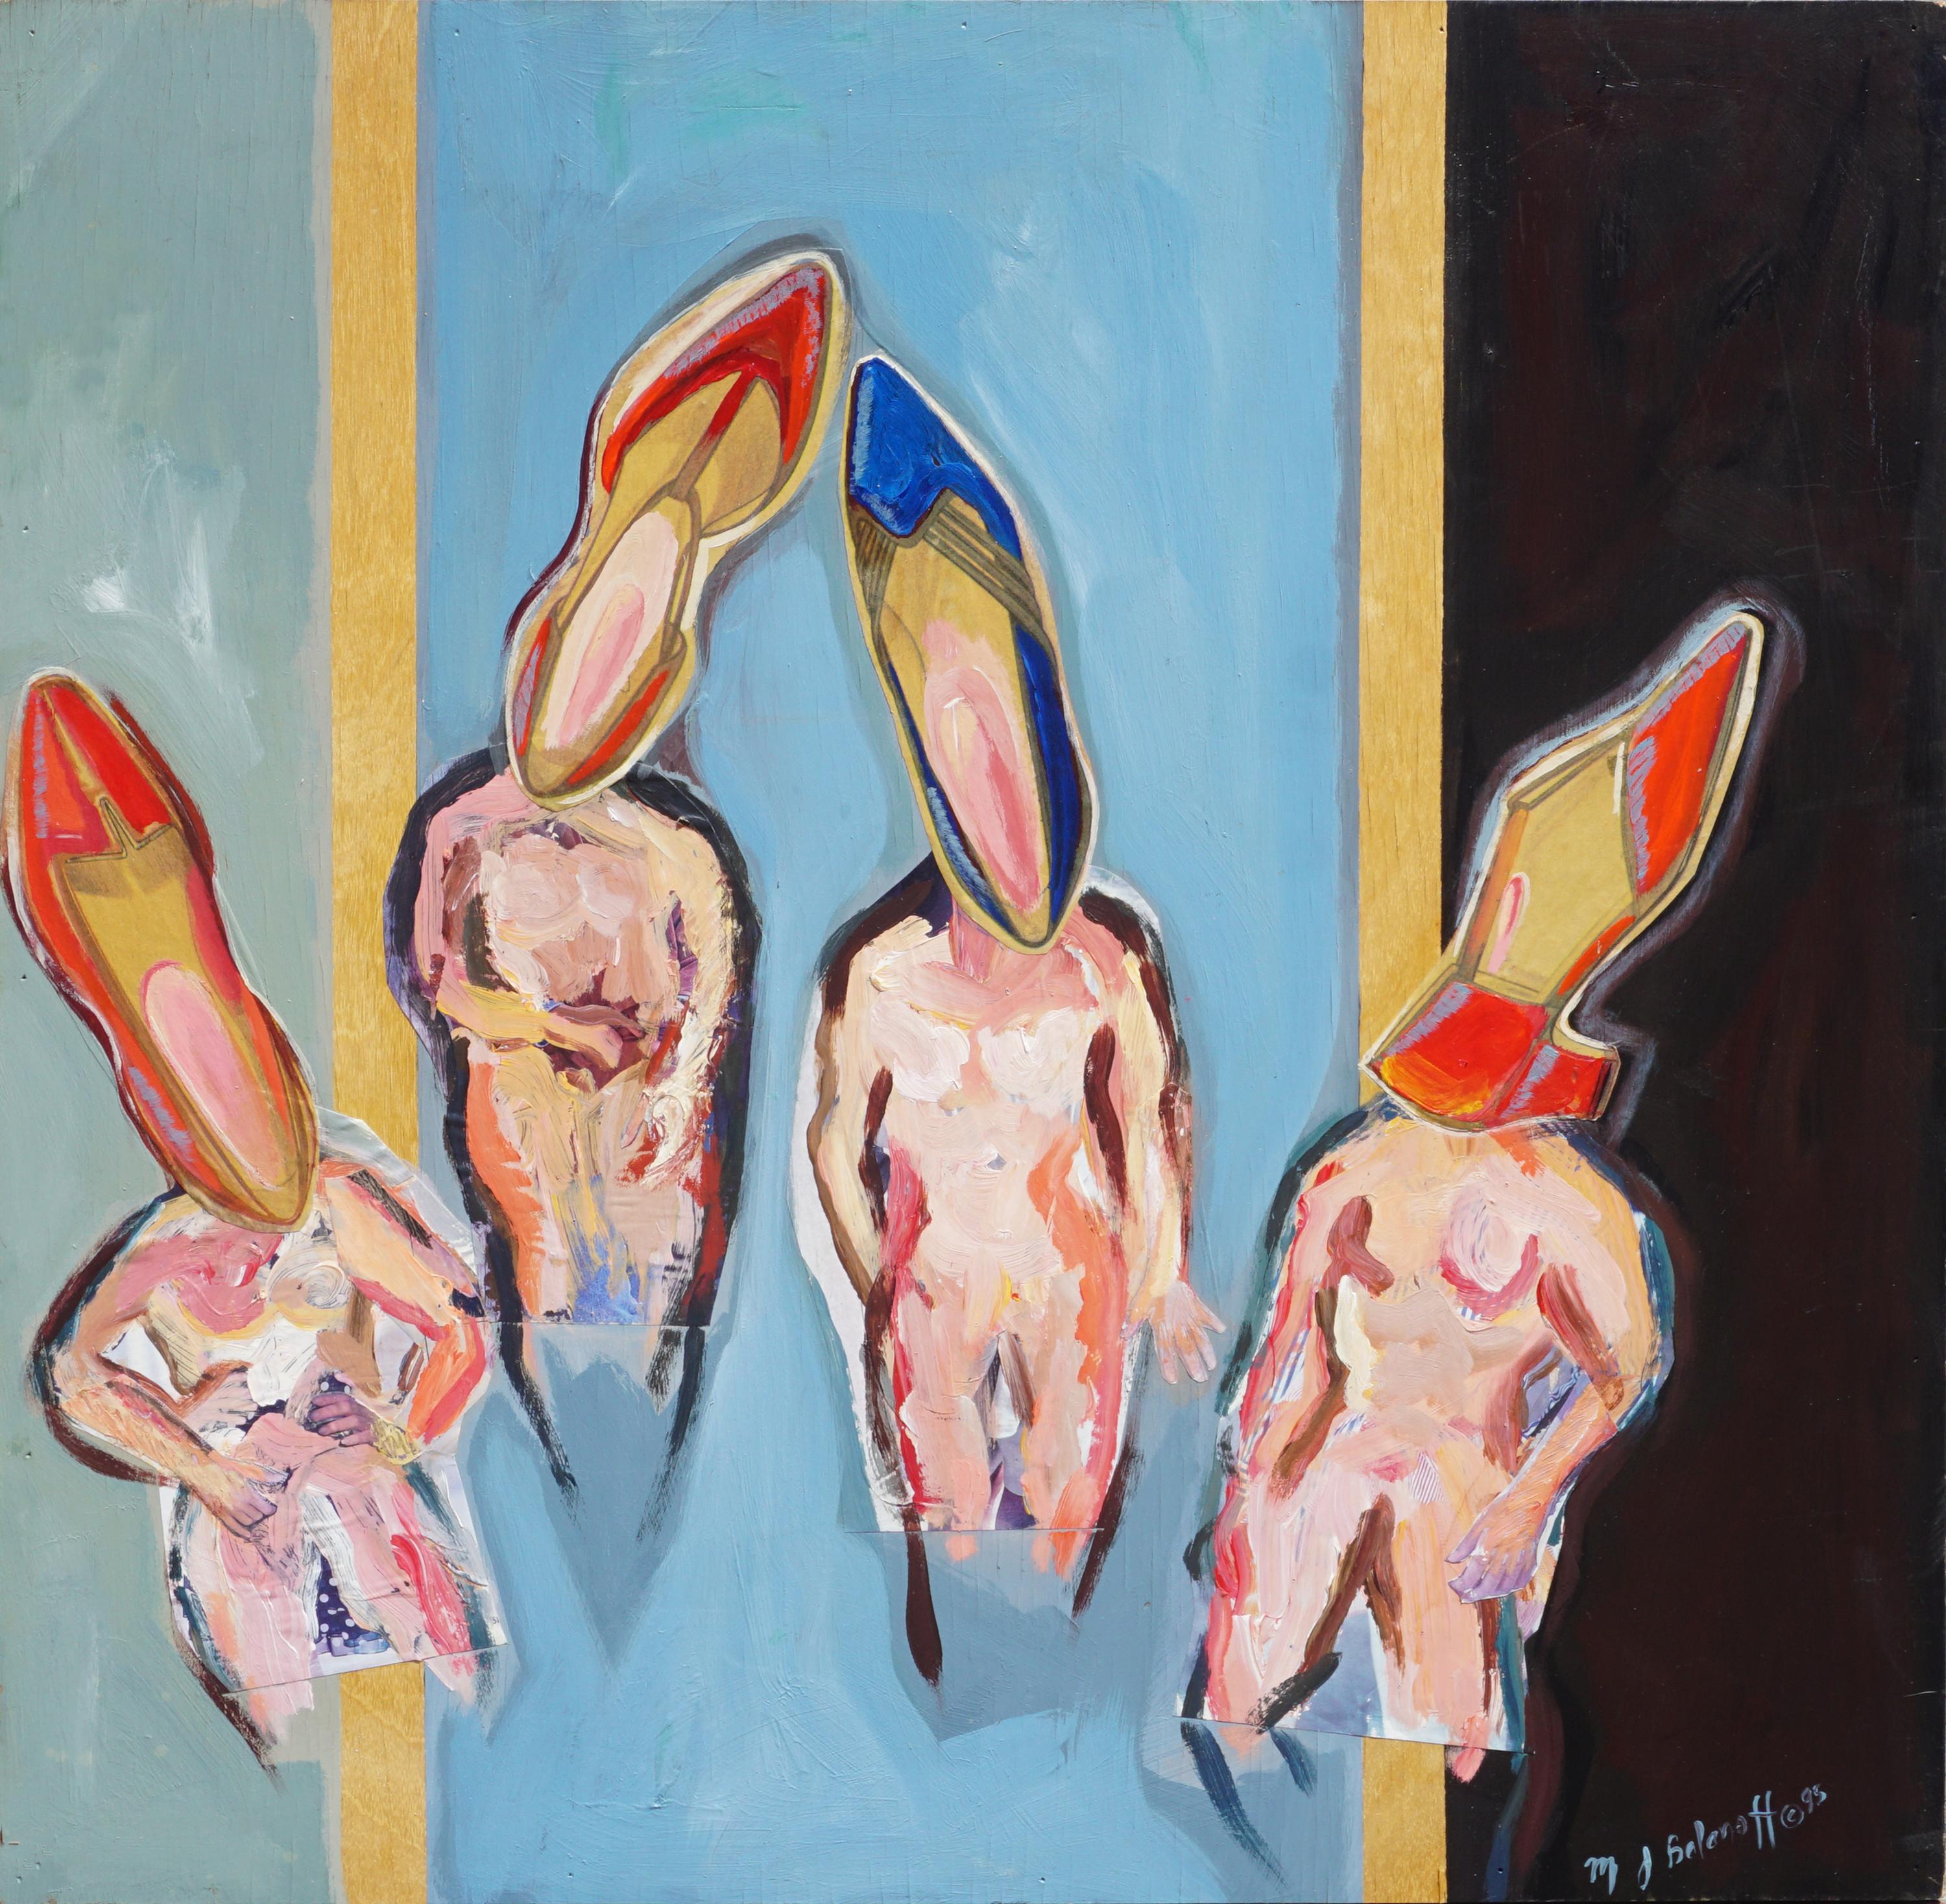 Shoe Fetish! Whimsical Surrealist Abstract Figurative with High Heel Heads 